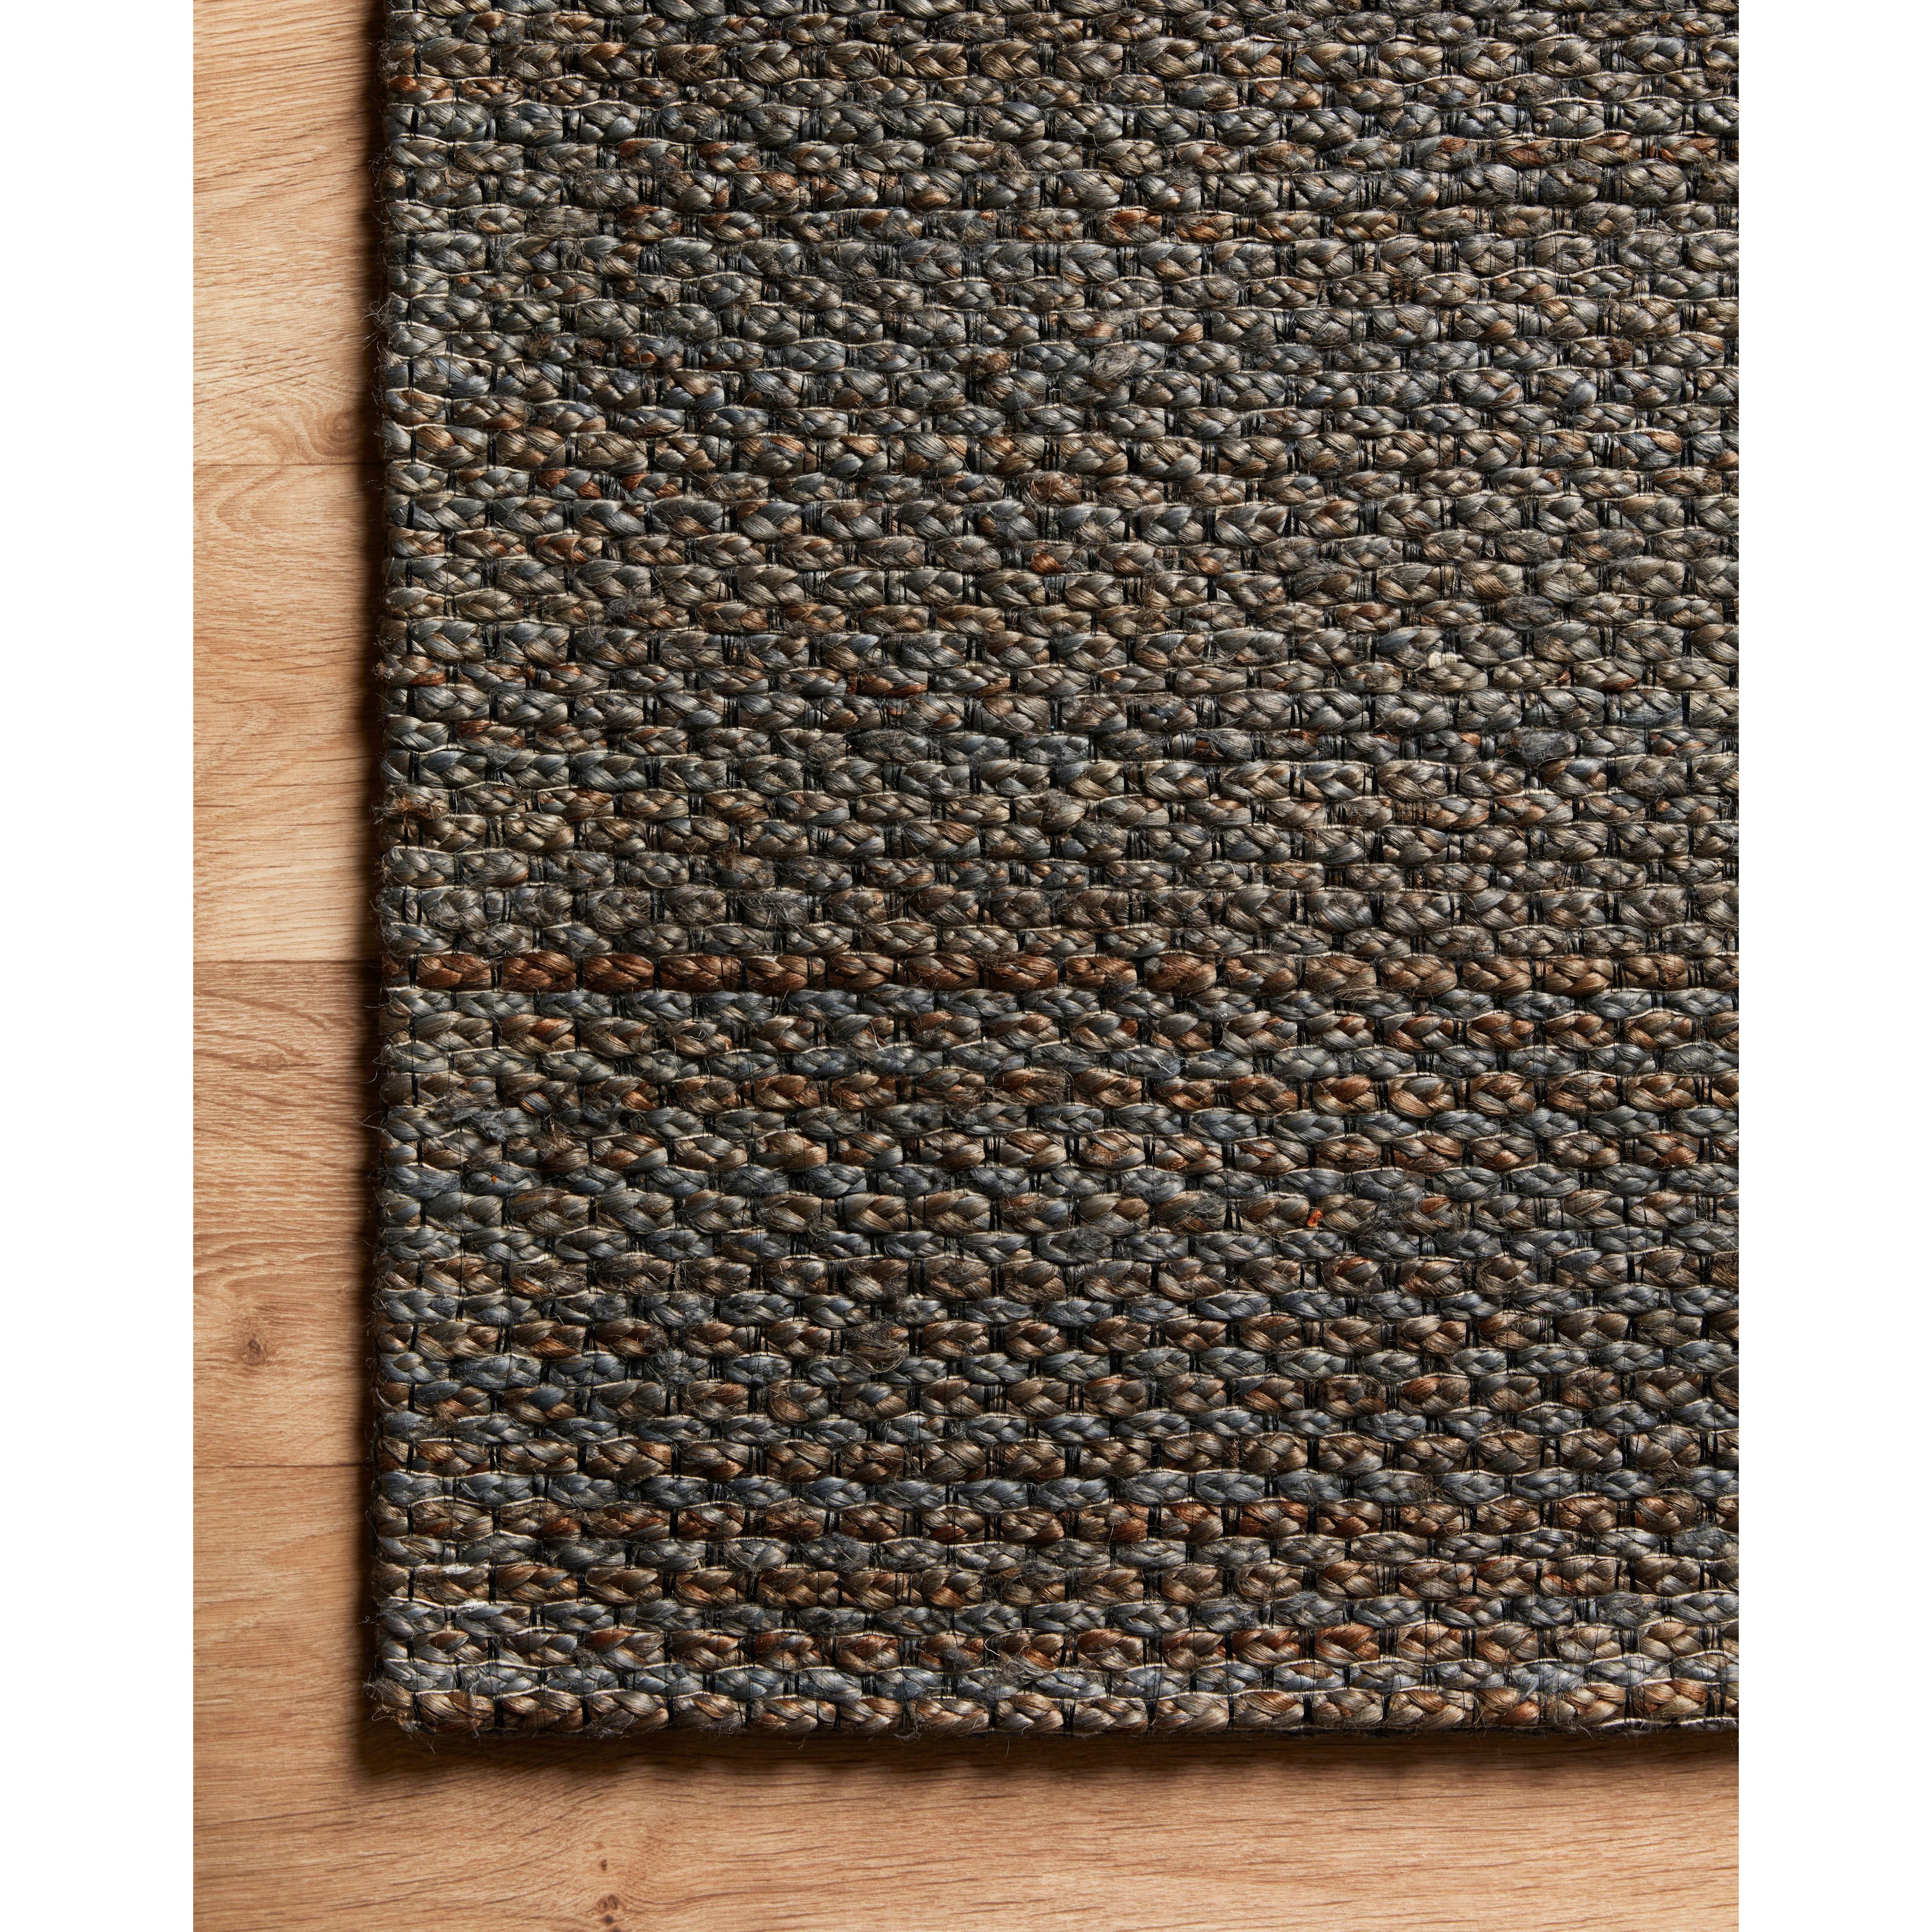 The Loloi Lily Blue Area Rug, or LIL-01 Blue, is an earthy base that isn't your average jute area rug. The hand-woven collection has an intricate yet subtle textural look that adds an elevated layer to any style. This area rug would be great for living rooms, dining rooms, or other high-traffic areas. 